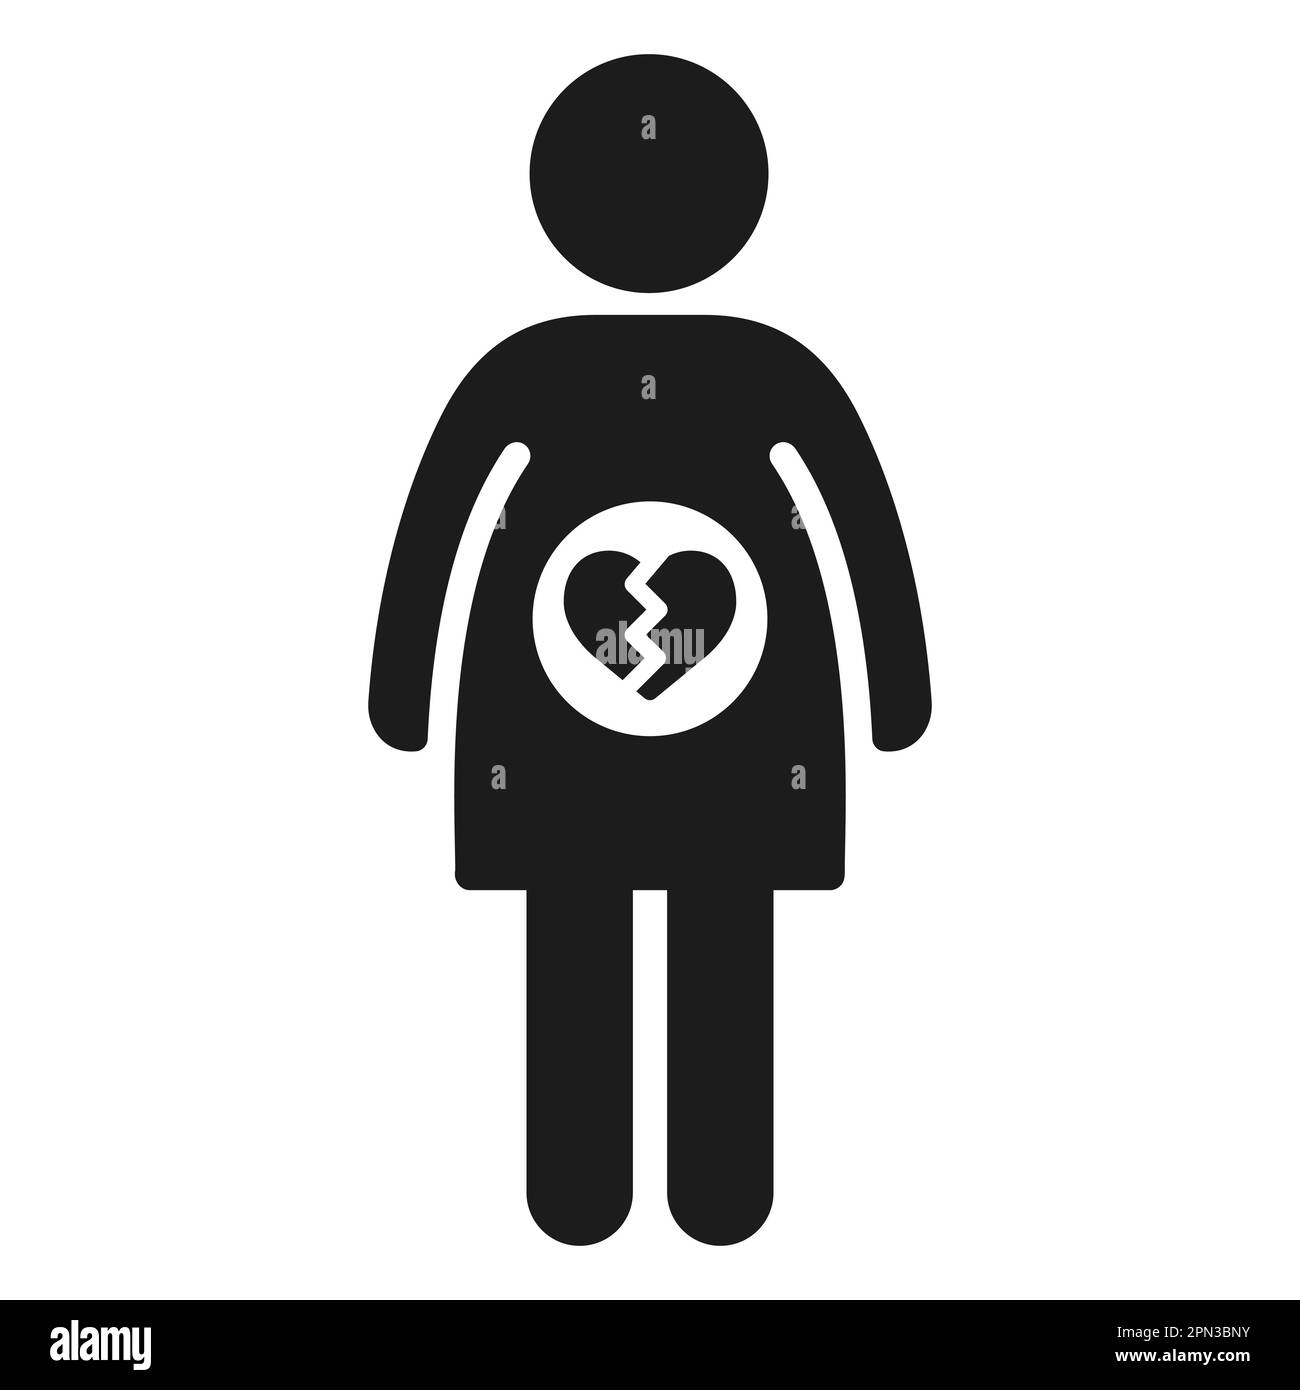 Miscarriage, loss of a pregnancy icon. Woman stick figure with symbol of broken heart in her belly. Vector pictogram. Stock Vector